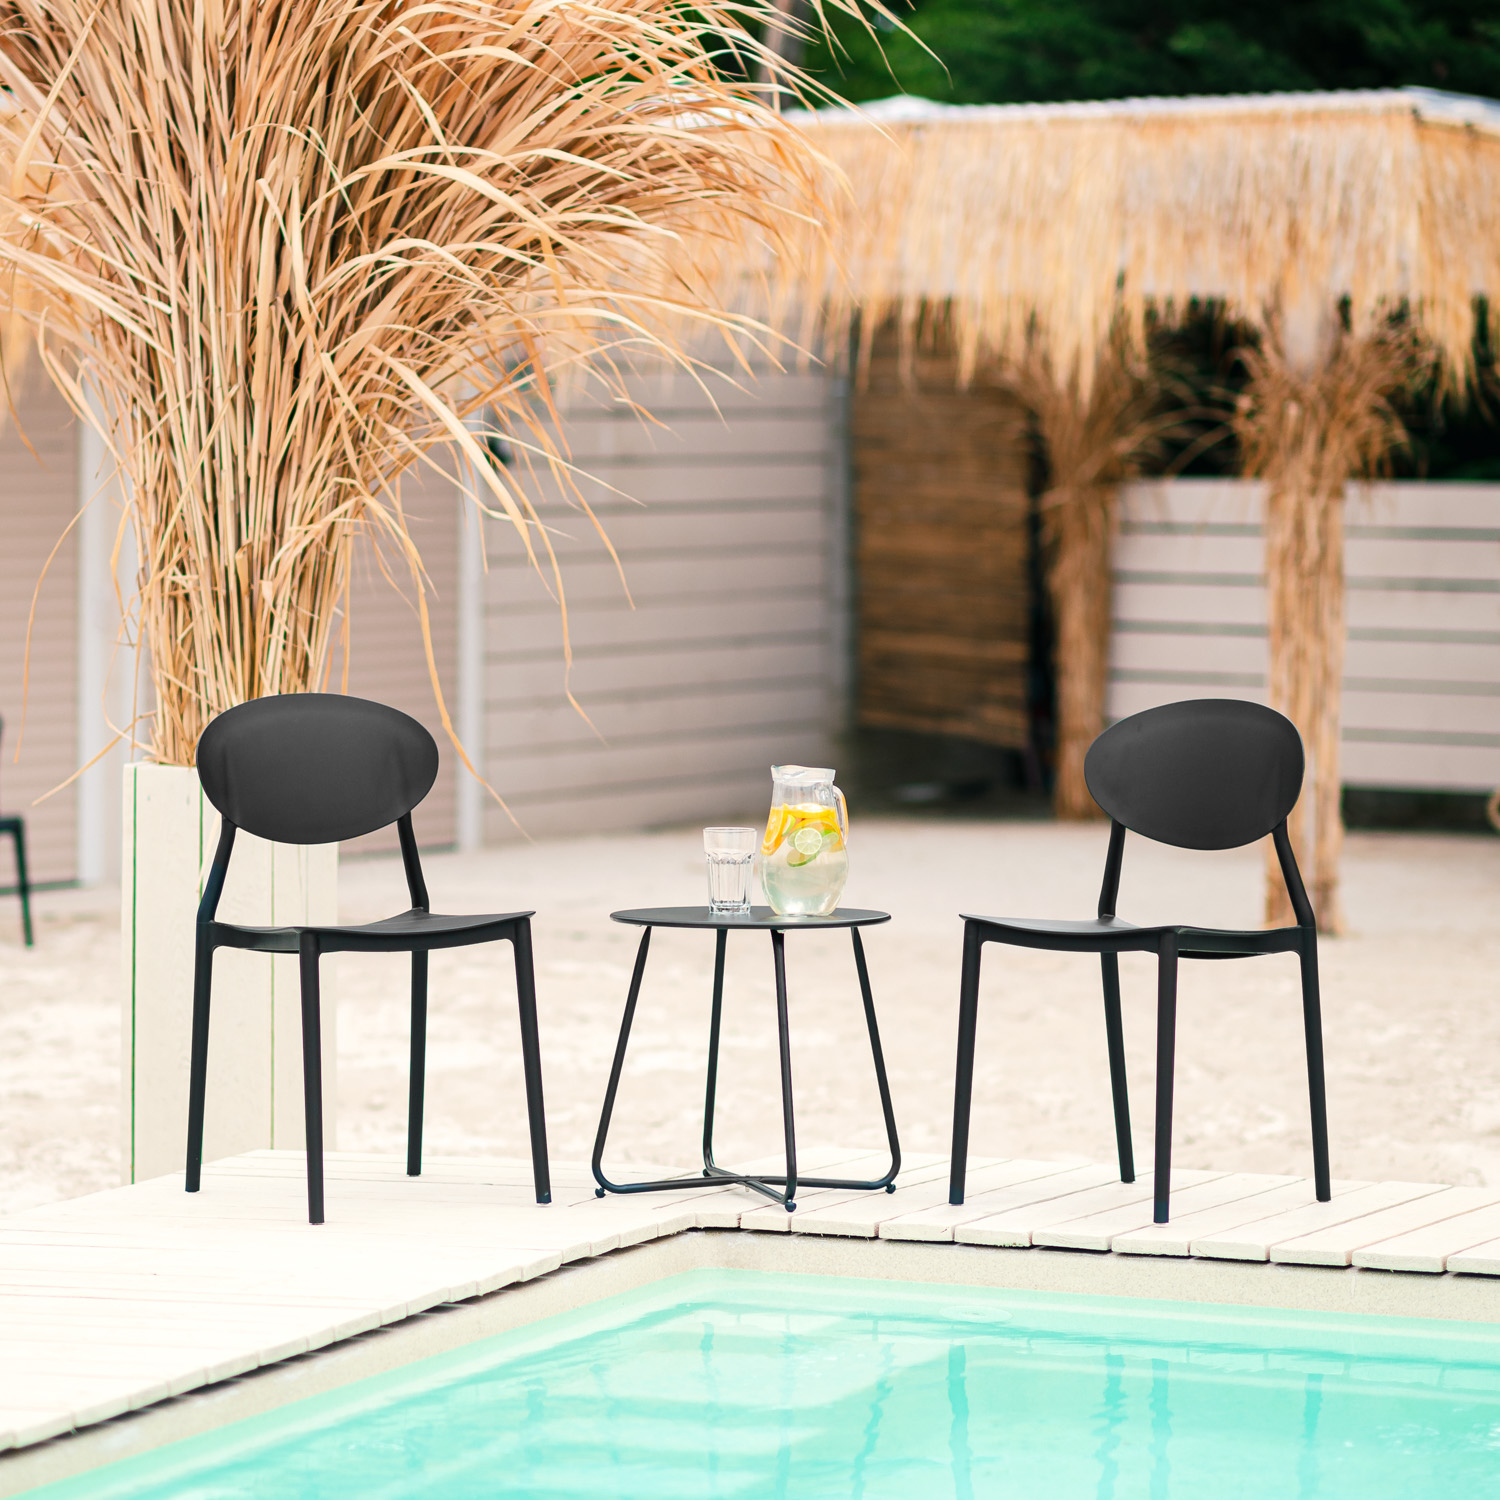 Garden chair Set of 4 Camping chairs Black Outdoor chairs Plastic Stacking chairs Kitchen chairs